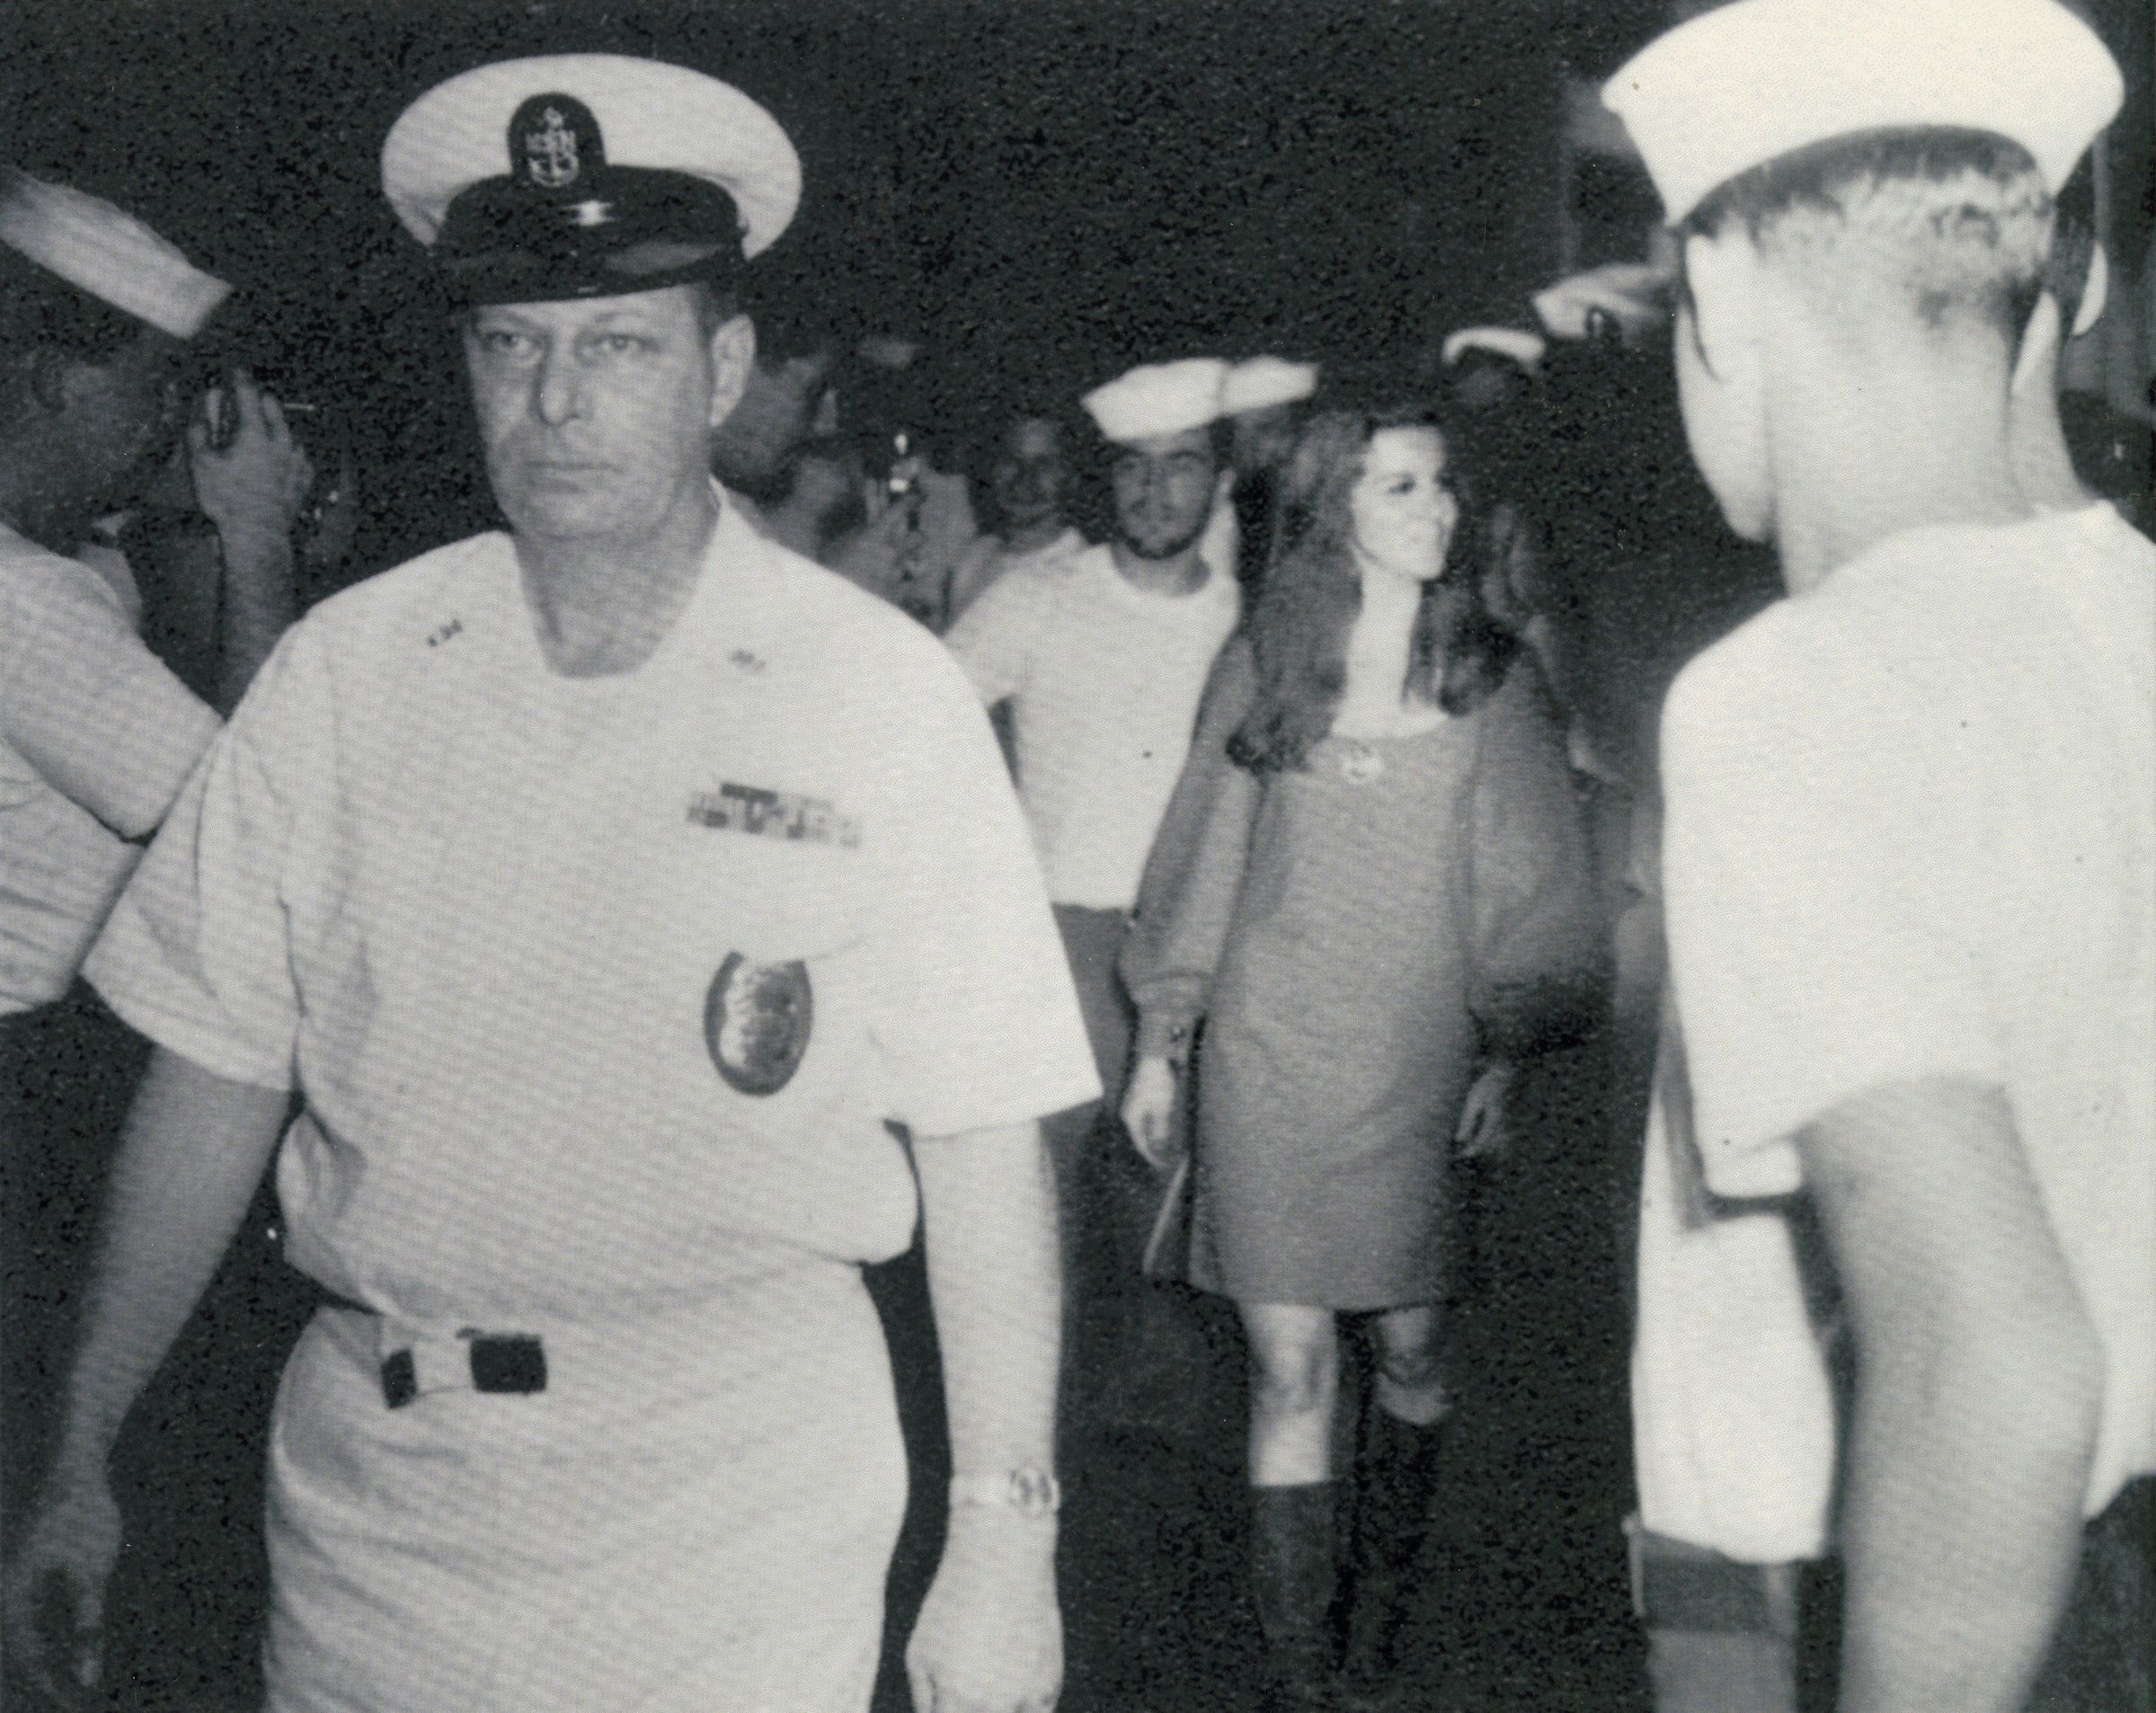 Primary Image of Ann-Margret is Welcomed Aboard the USS Yorktown (CVS-10)